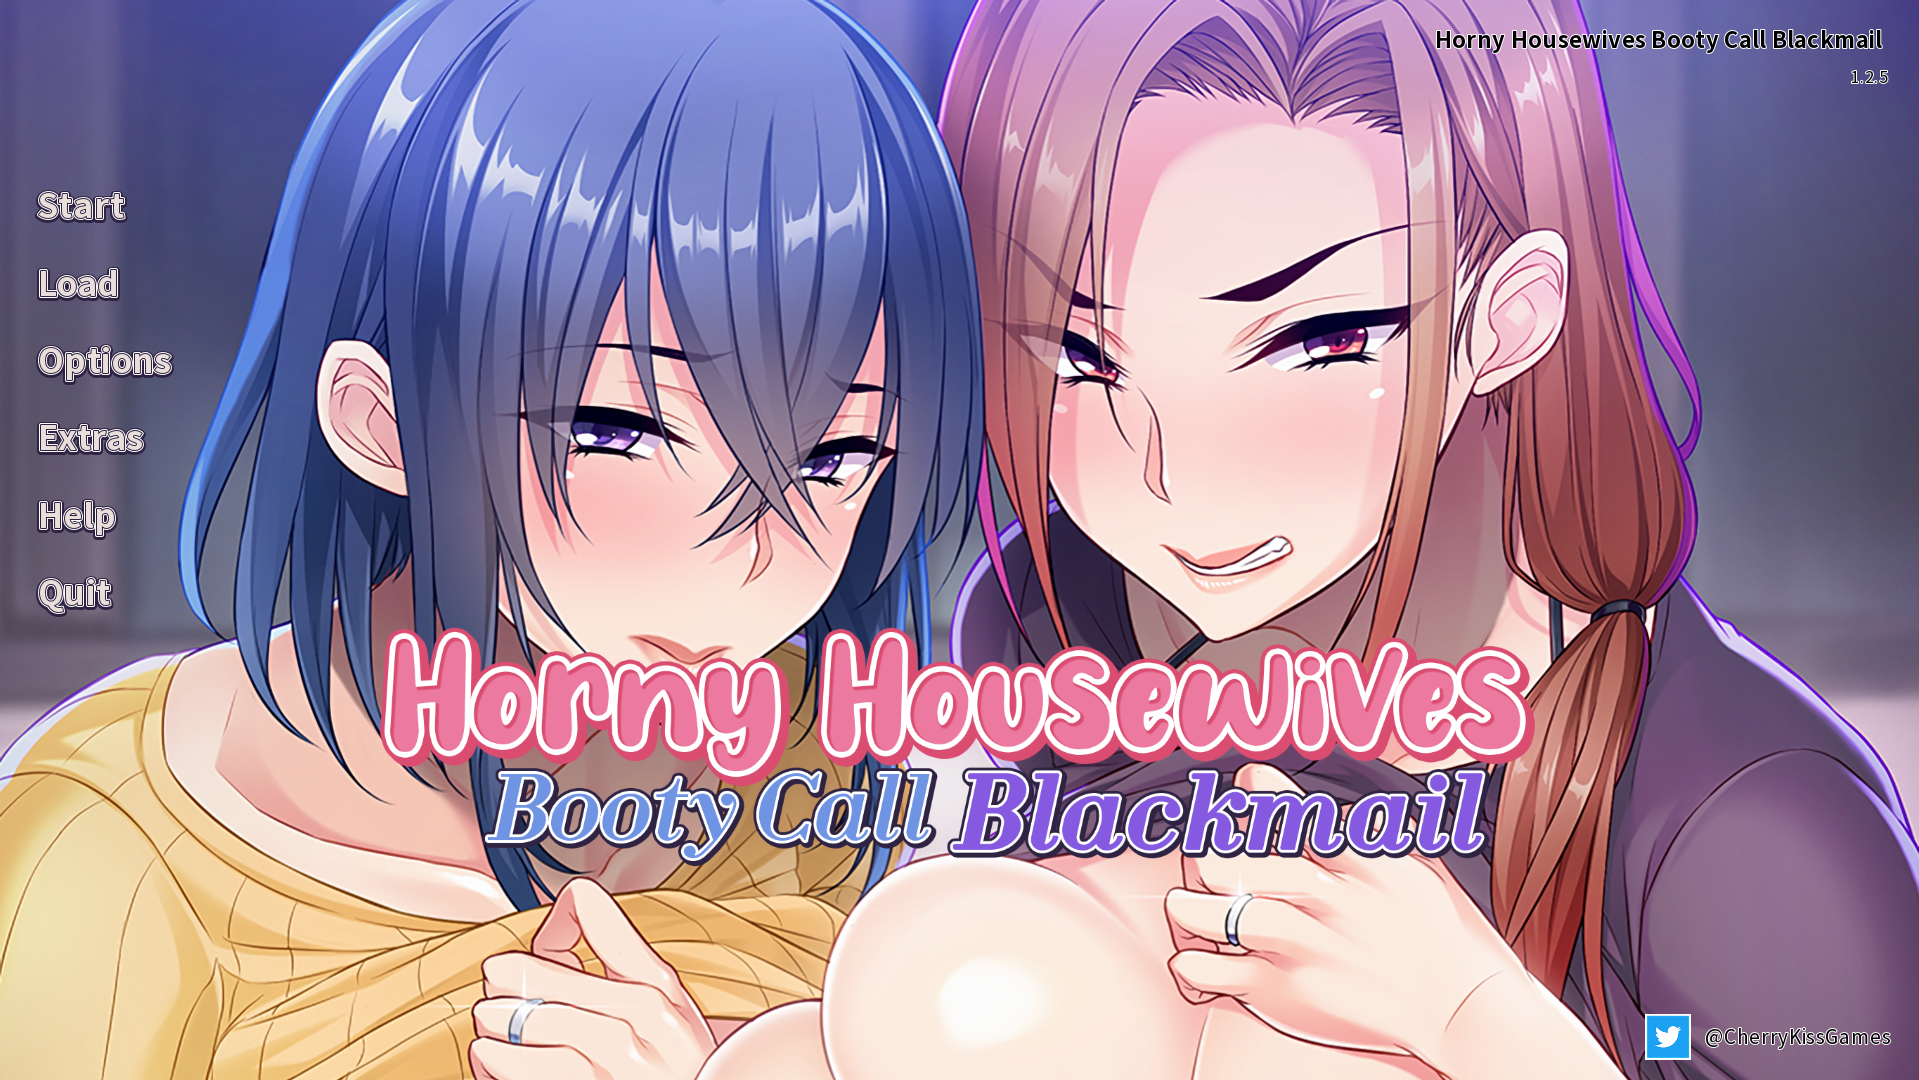 Horny Housewives Booty Call Blackmail [COMPLETED] - free game download, reviews, mega